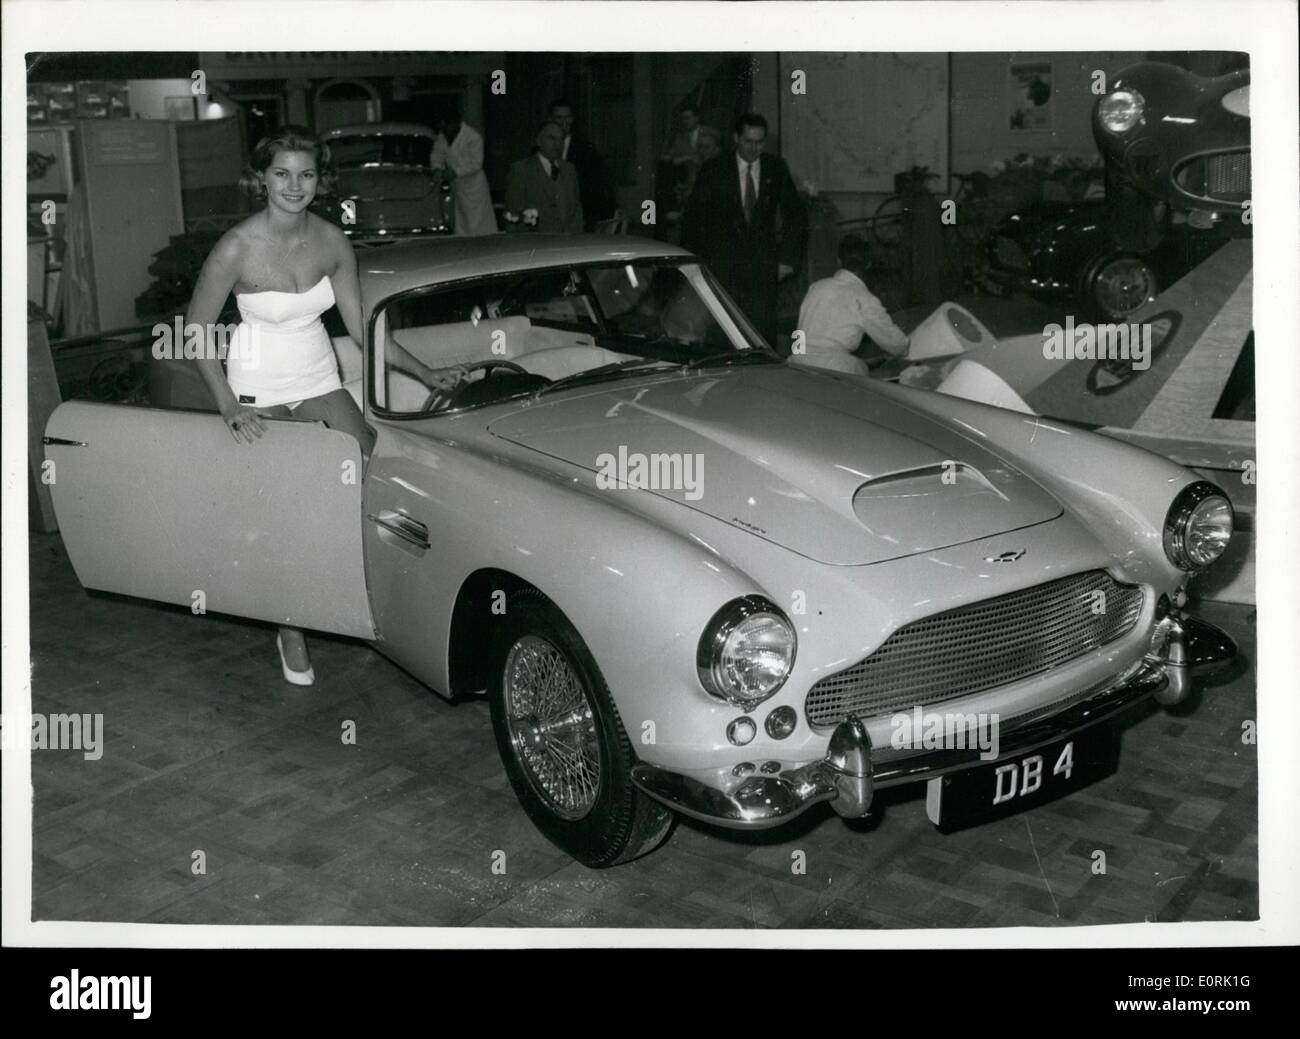 Oct. 10, 1959 - Motor Show Preview - At Earl's Court. ''Miss World'' - And The Aston Martin. Photo shows Penny Coelan the reigning ''Miss World'' - wearing a 1960 swimsuit by Nelbarden seated on the new D. B.4 Aston Martin at the preview today. Stock Photo